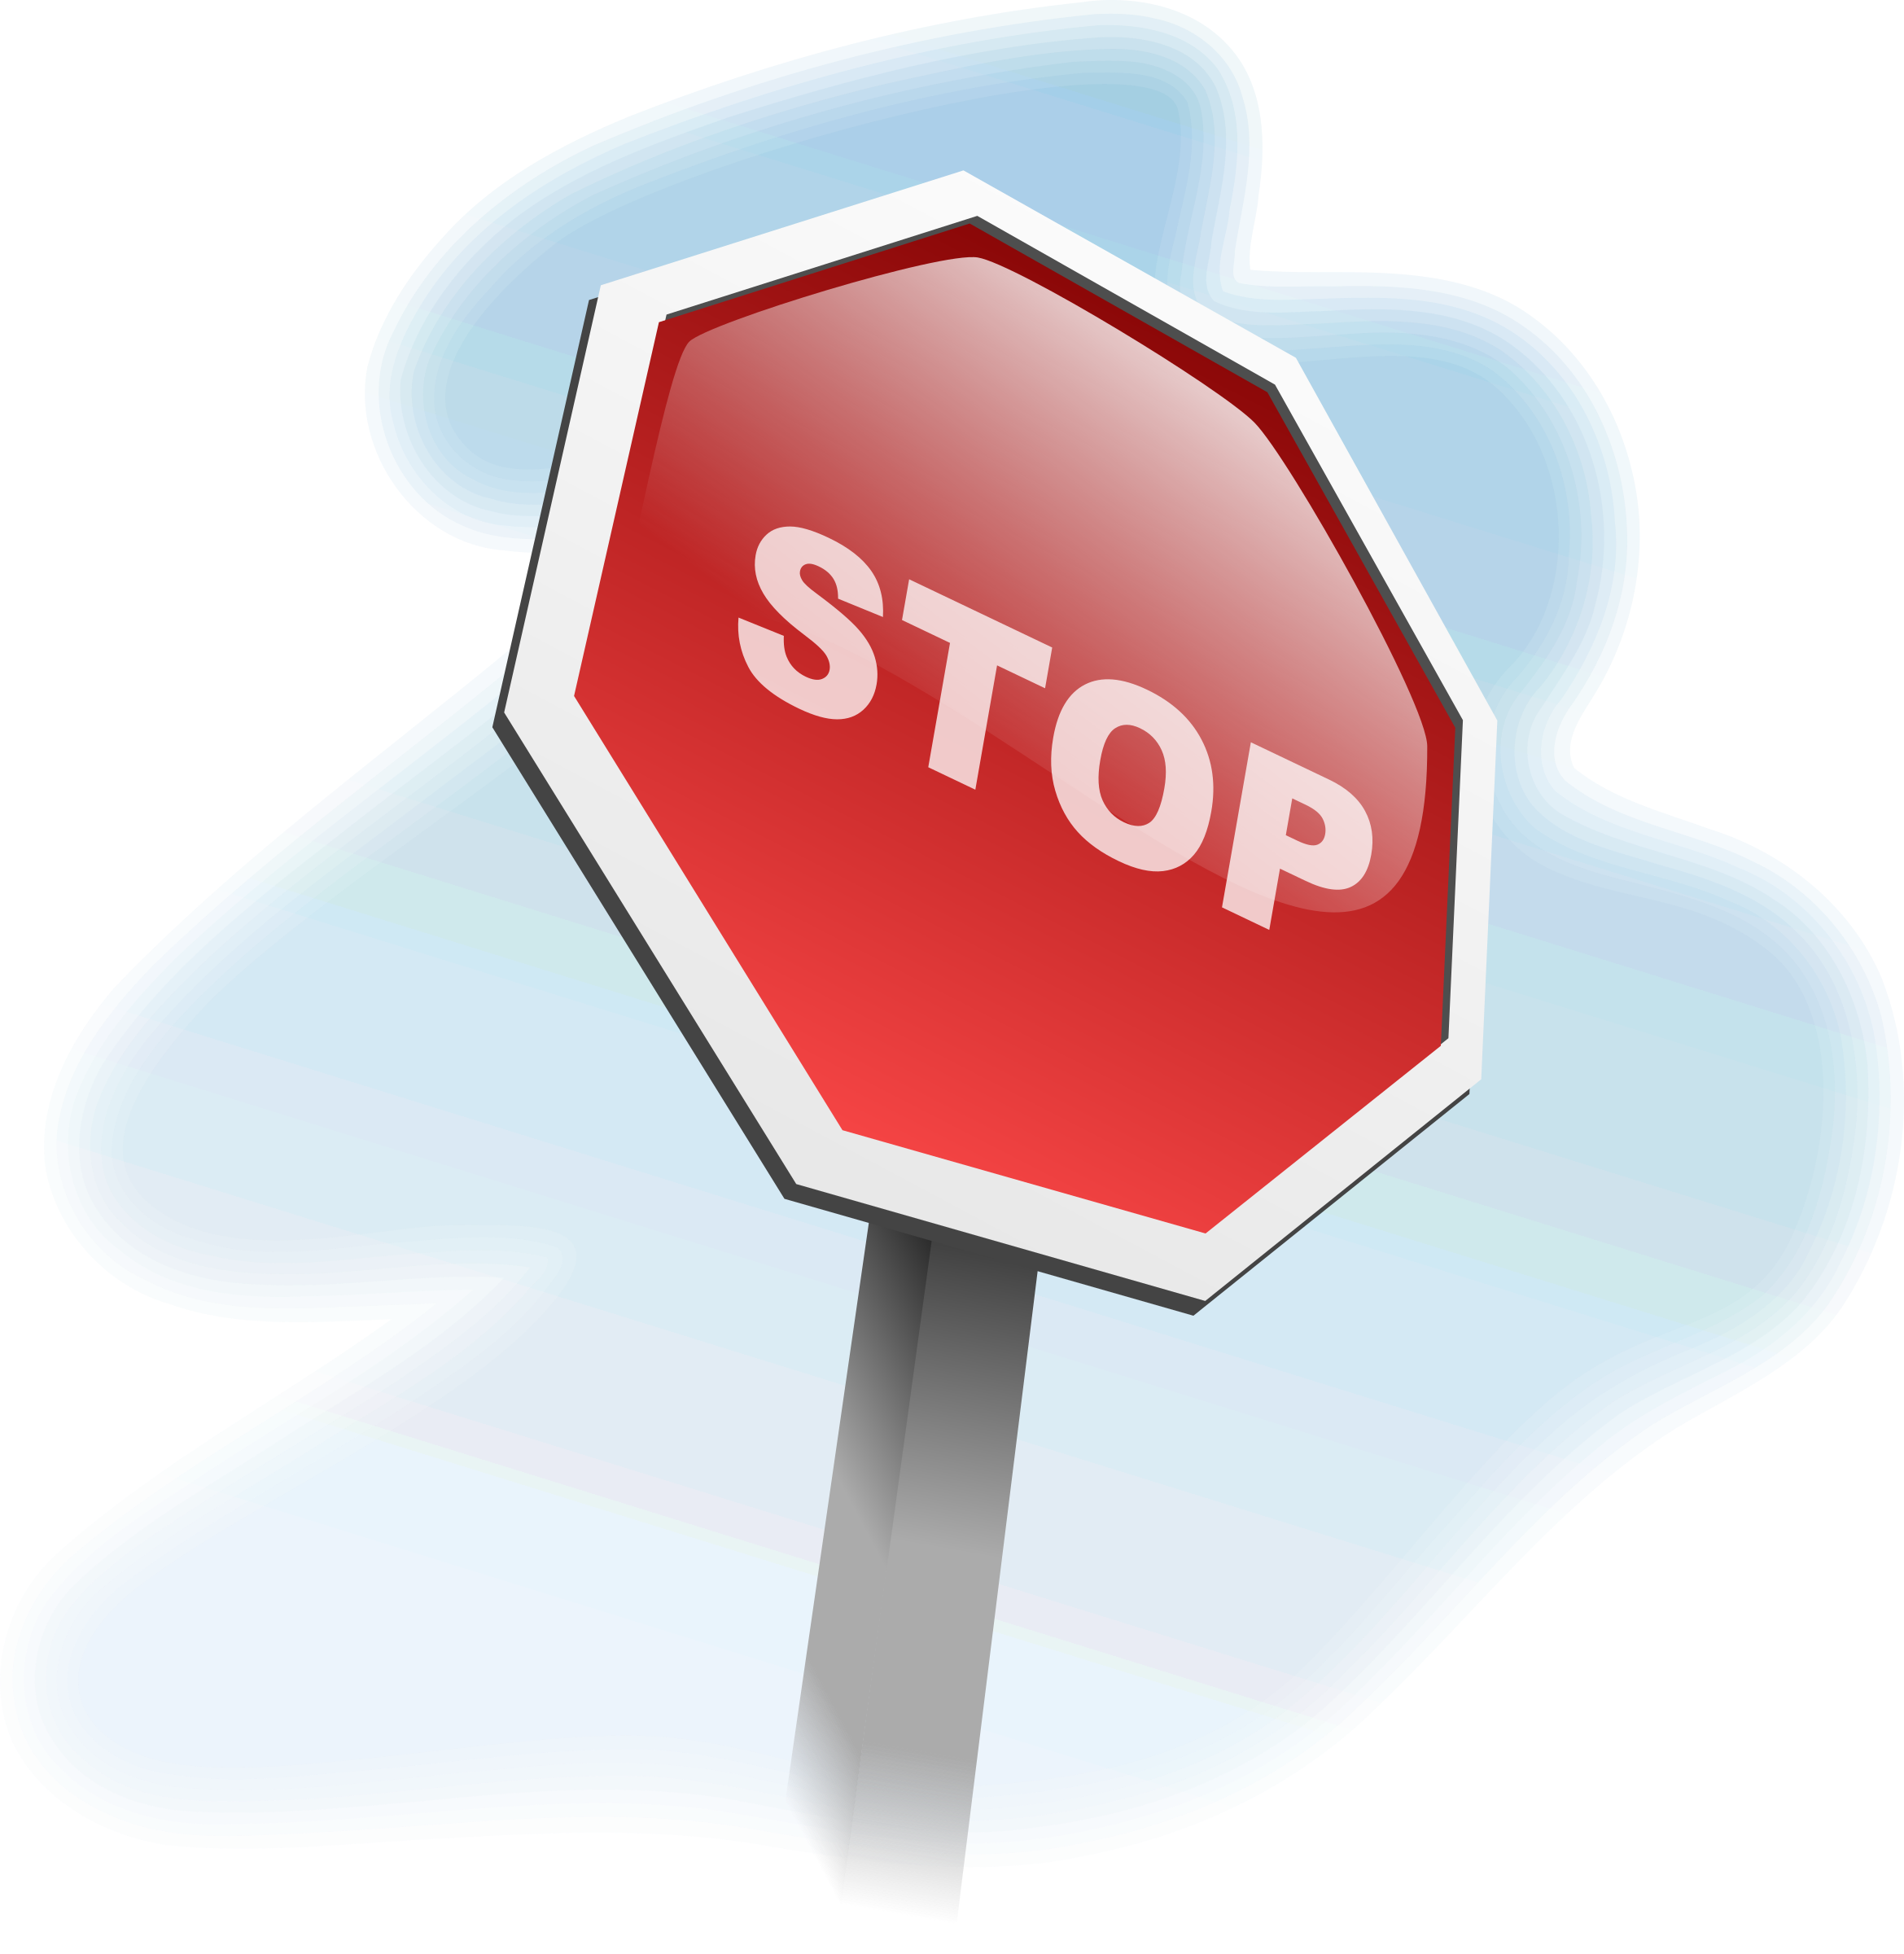 microsoft clipart stop sign - photo #34